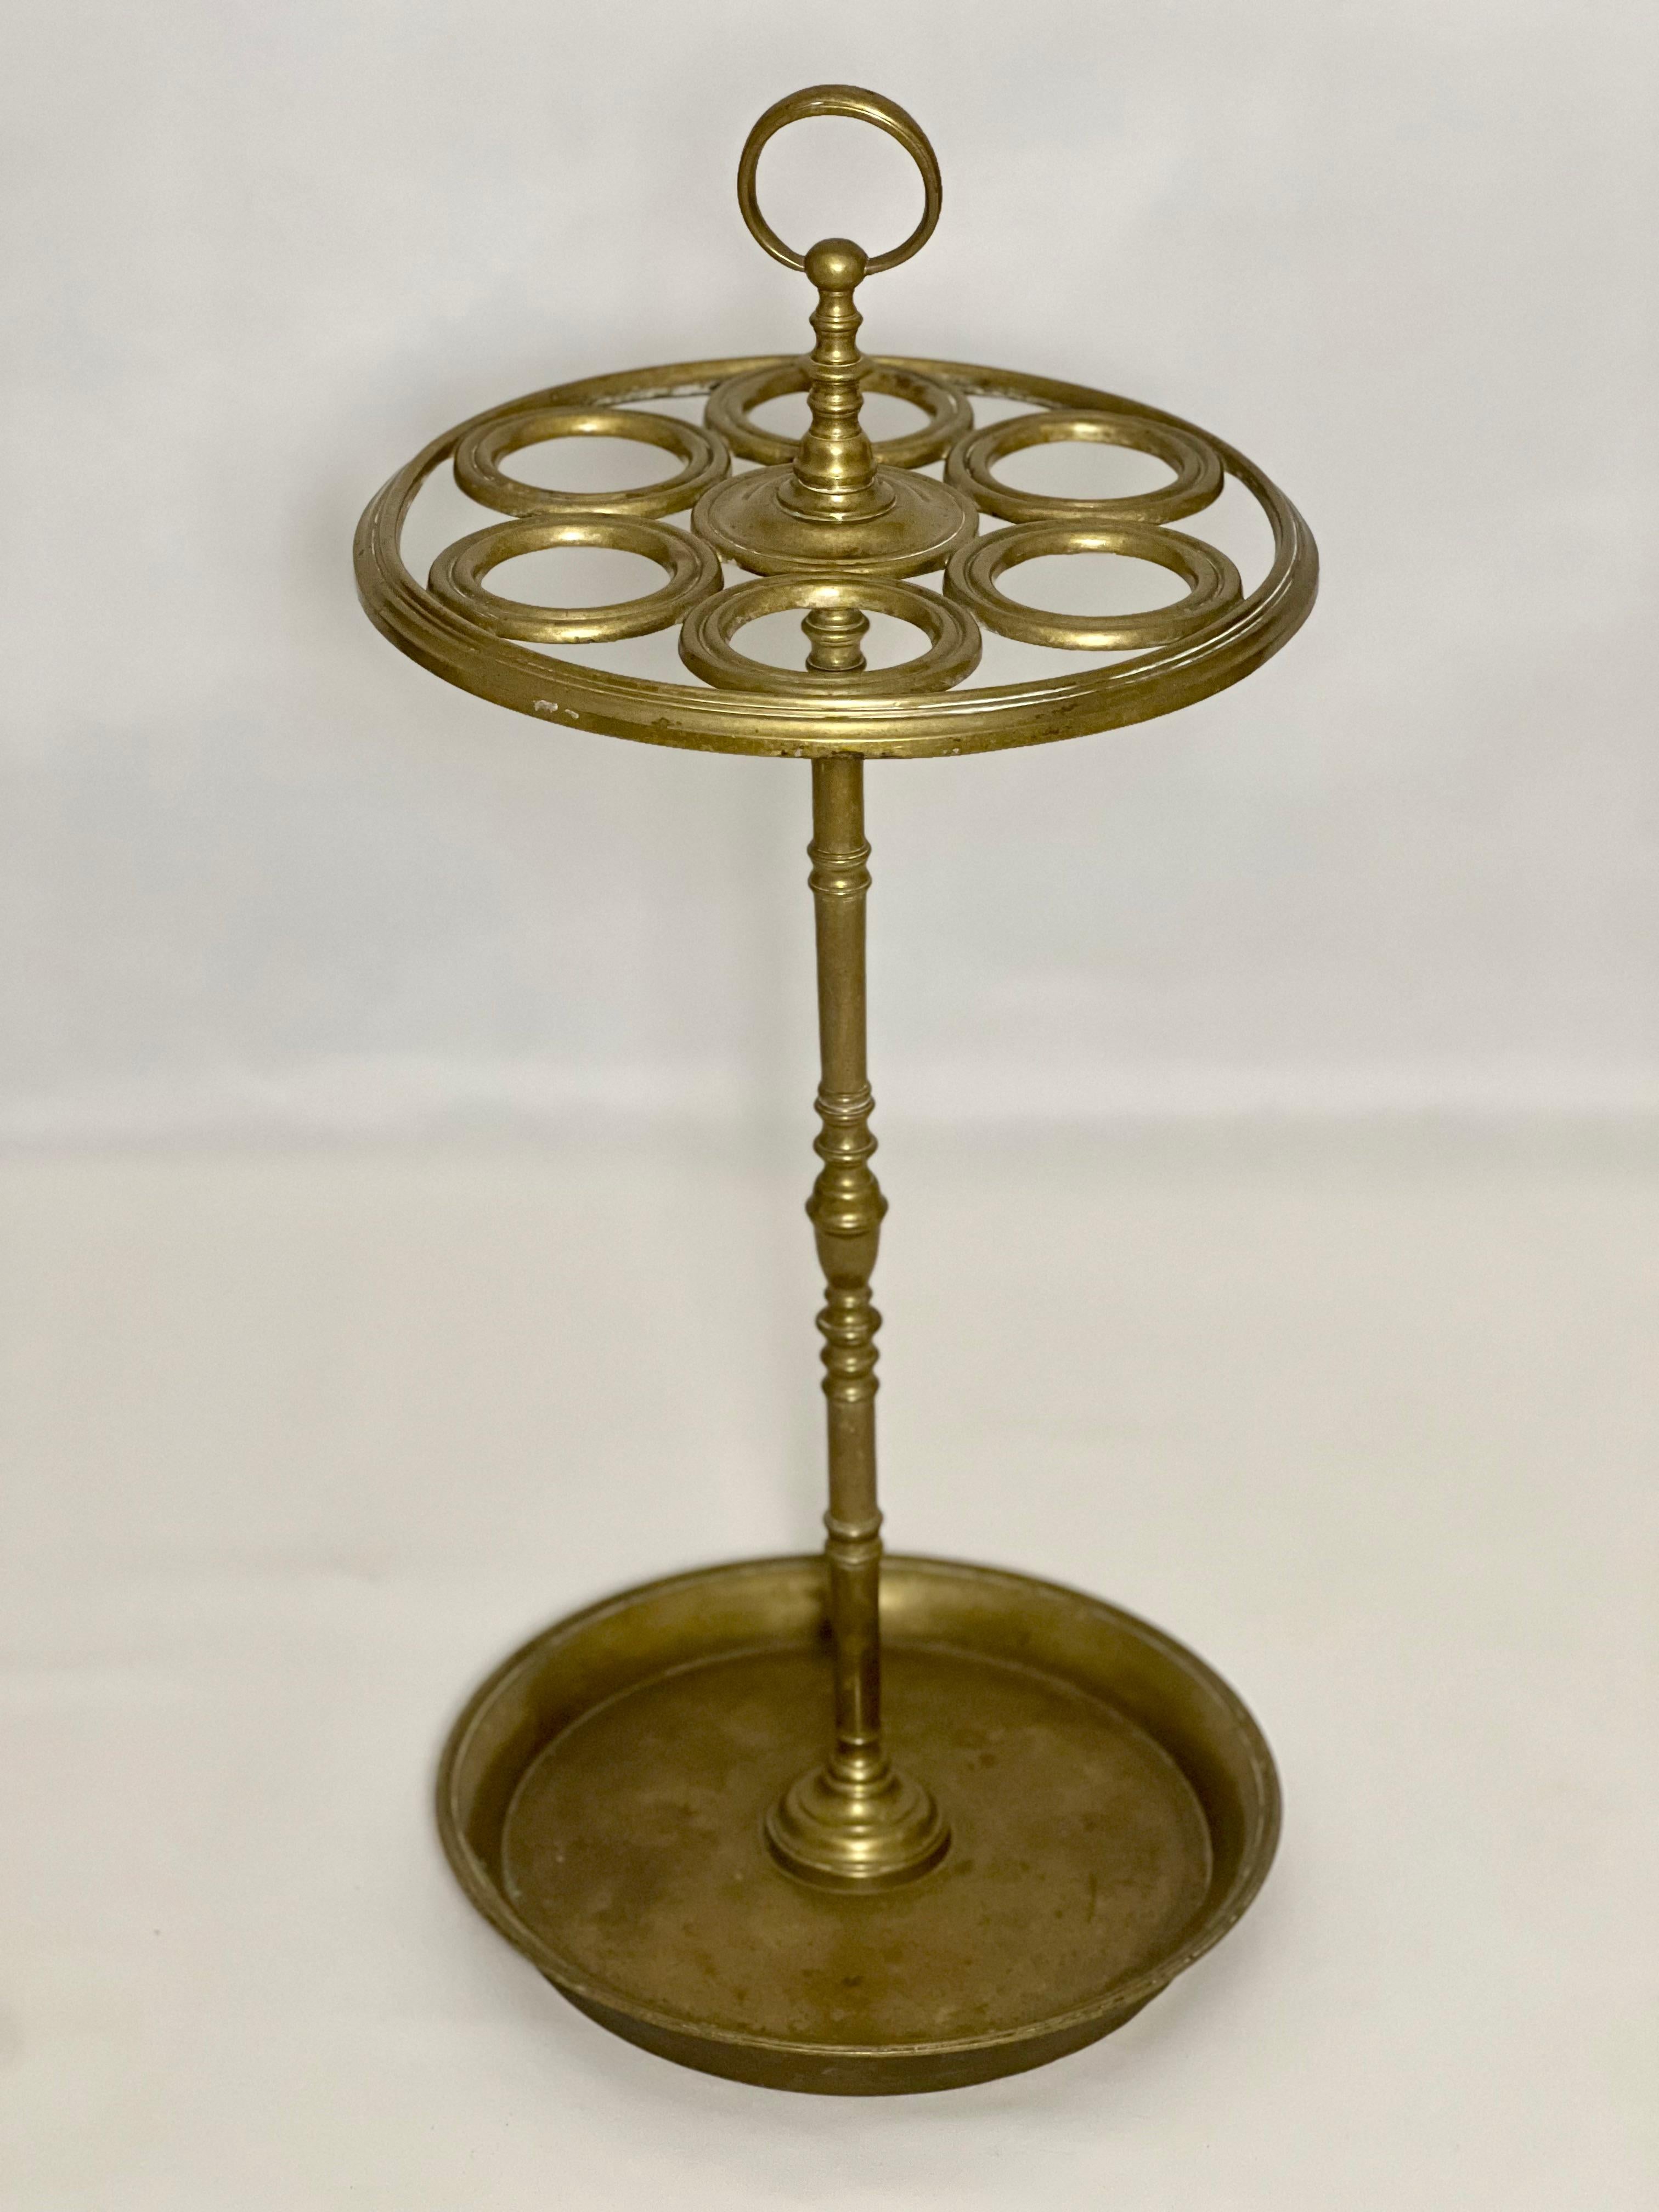 19th century solid brass umbrella stand.

Beautiful six section holder featuring a ring shaped handle, finely turned support and circular base with raised rim.  Simple in design yet quite unique. It has a pleasantly aged patina and good weight. 